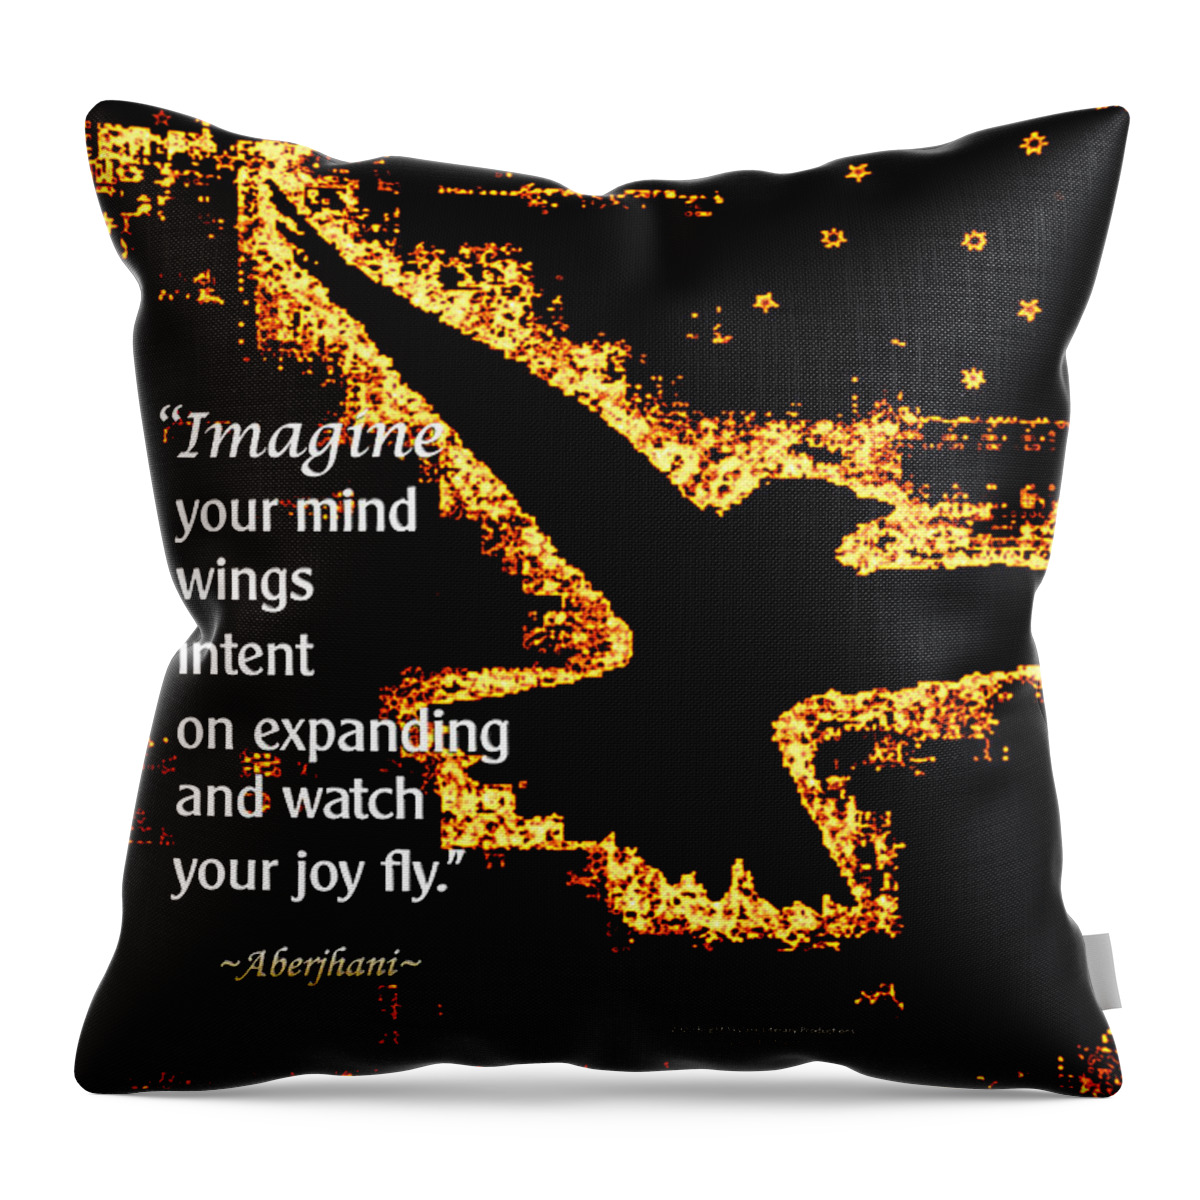 Imagination Throw Pillow featuring the digital art Watch Your Joy Fly by Aberjhani